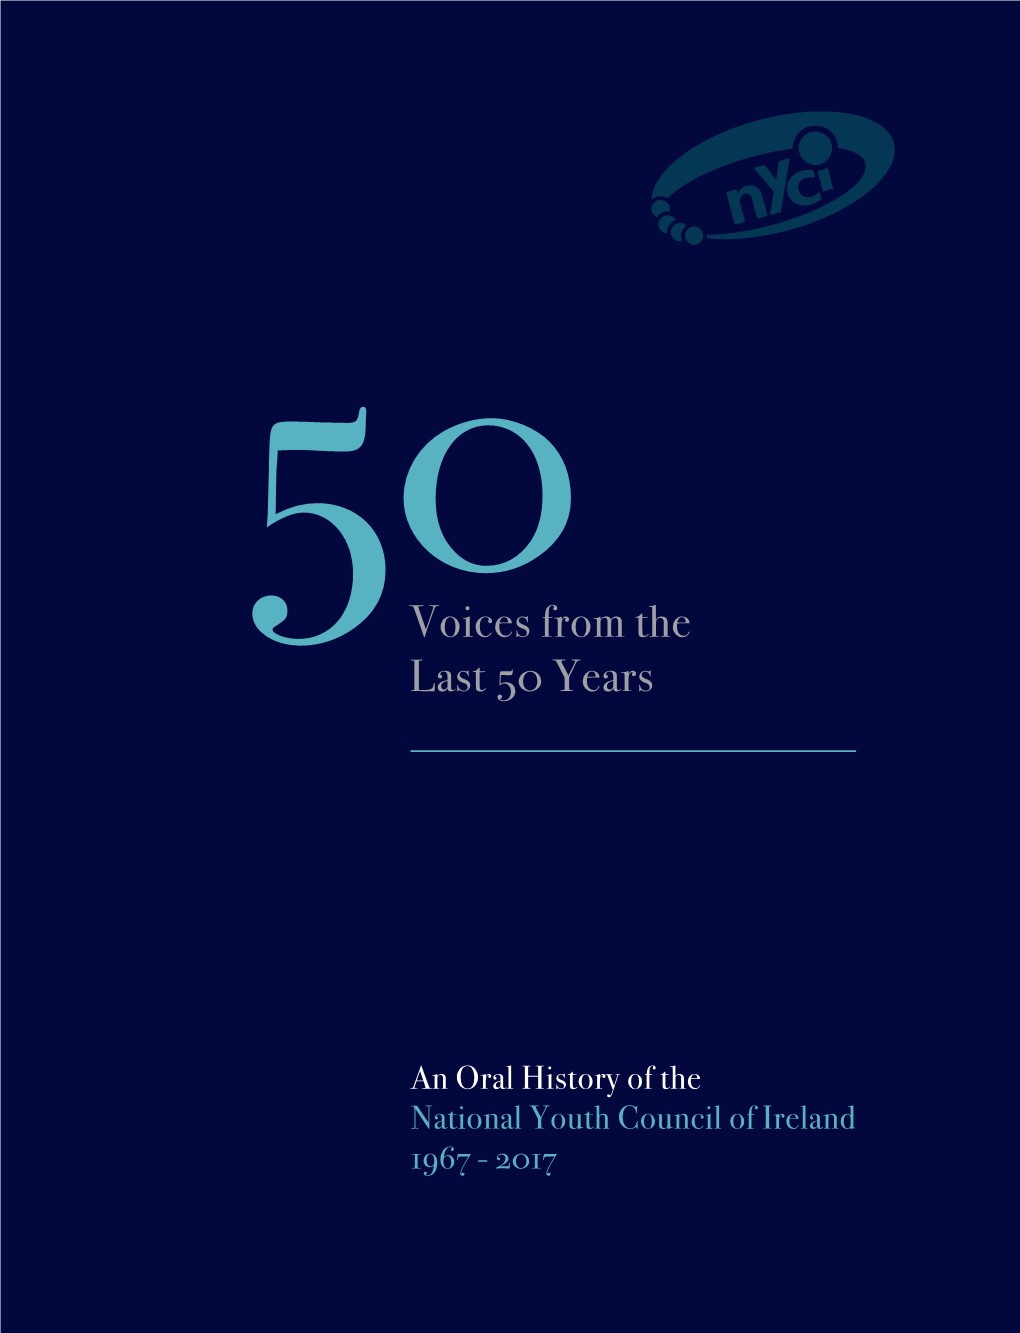 50 Voices from the Last 50 Years